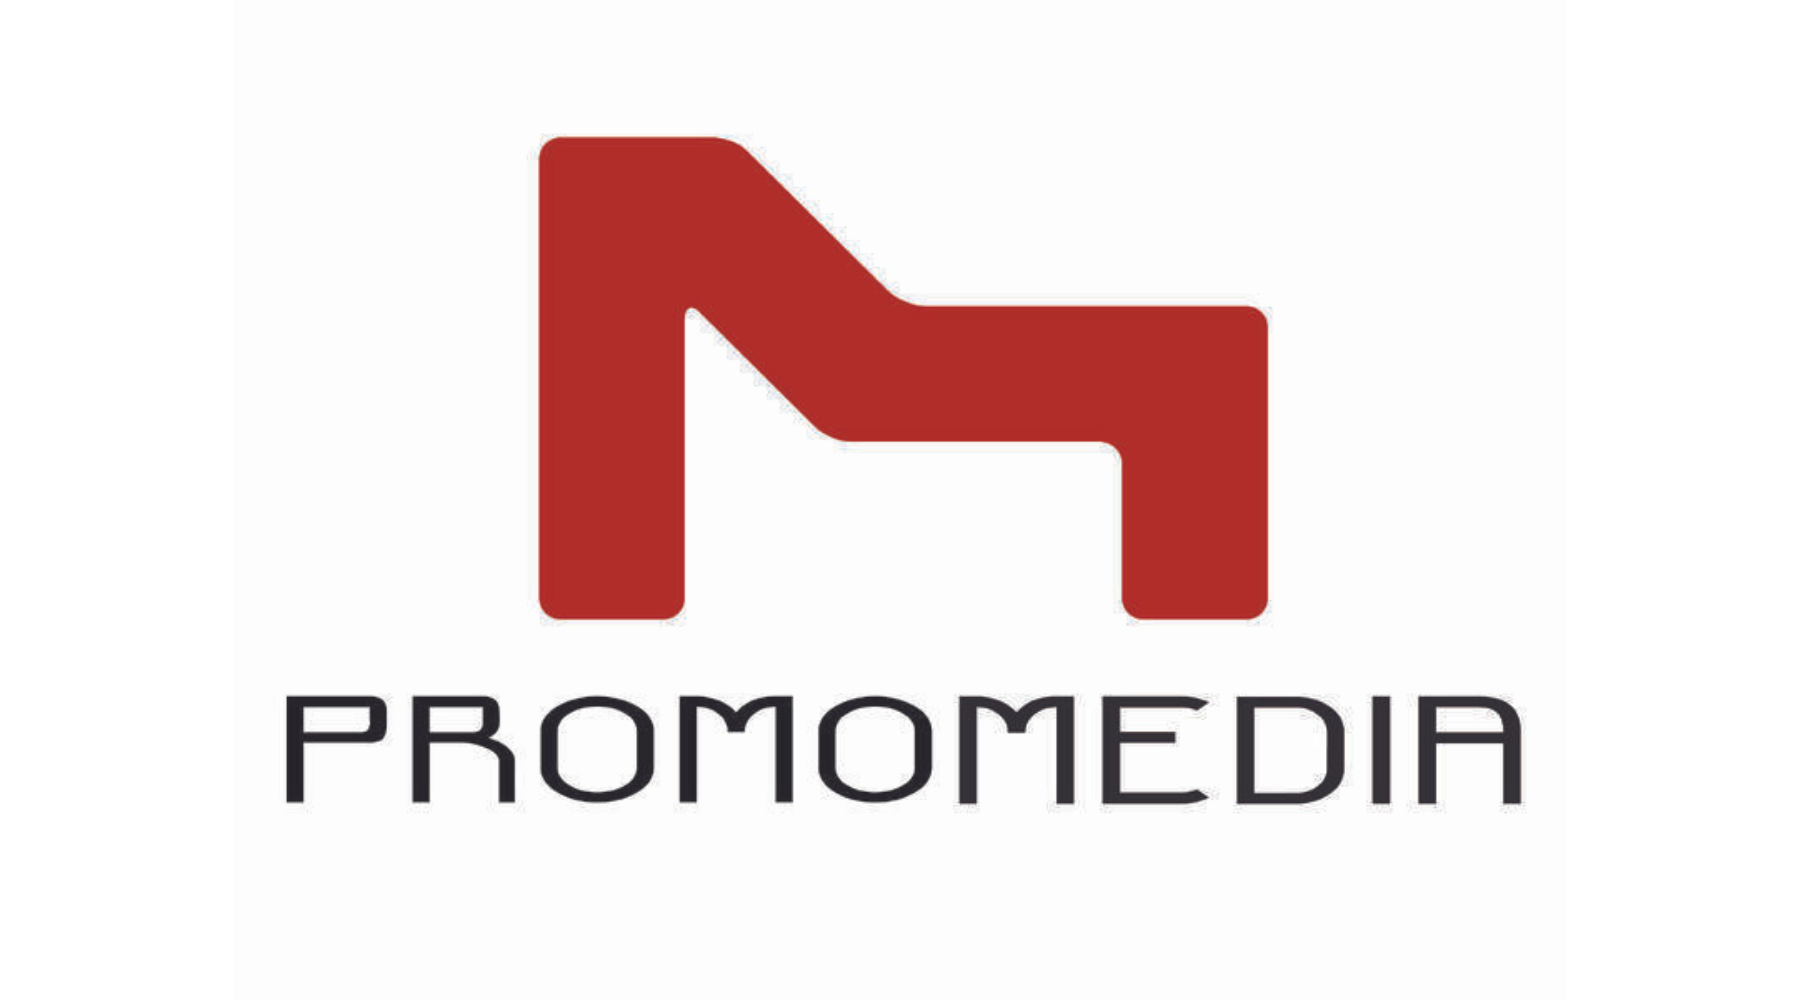 Promomedia Has Successfully Established its Presence in Qatar With Stunning Static Outdoor & Digital Media Screens